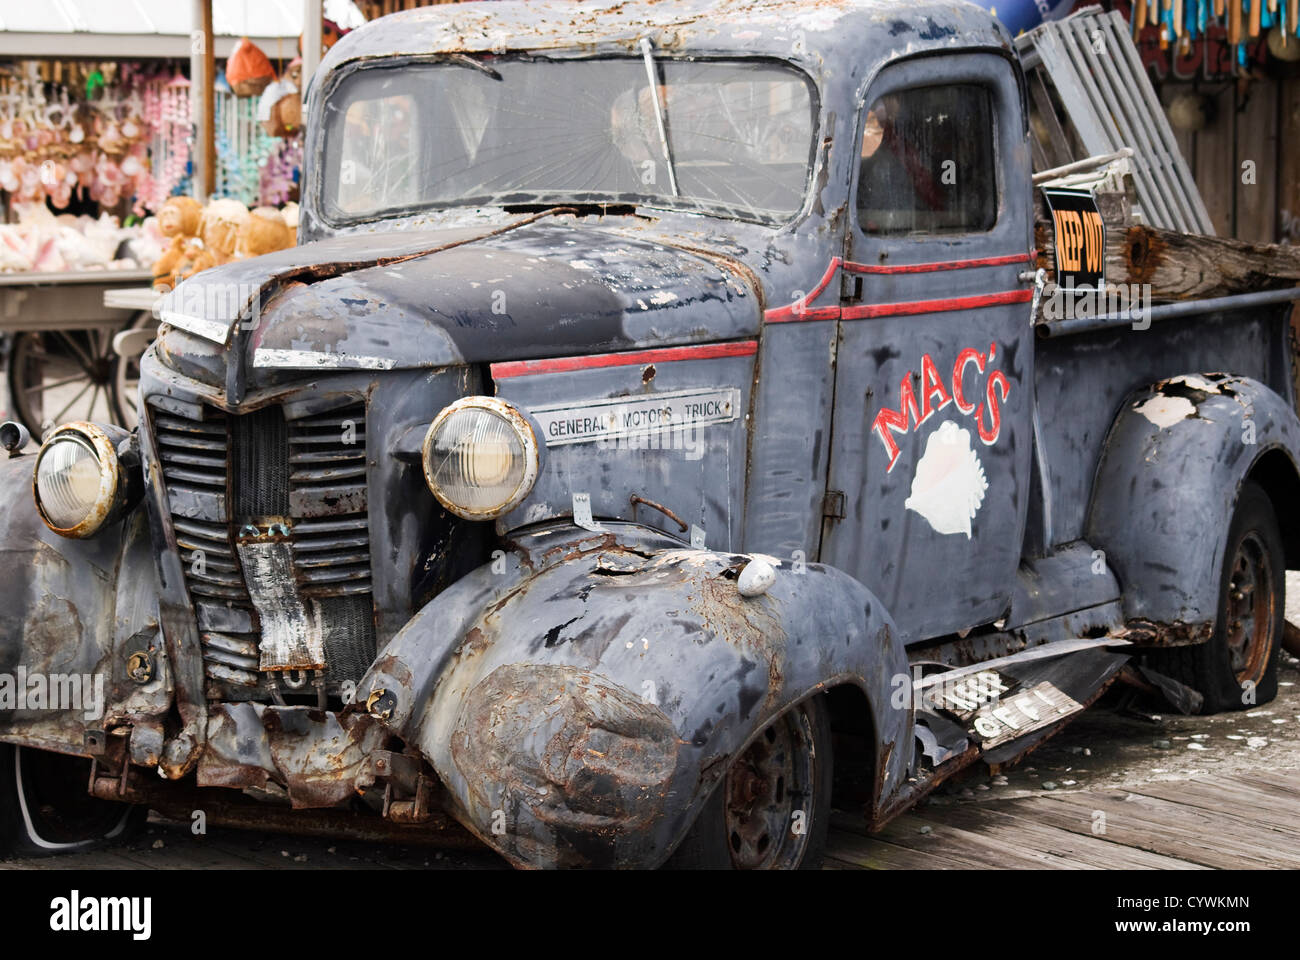 Old pick up truck outside a store in the Florida Keys Stock Photo